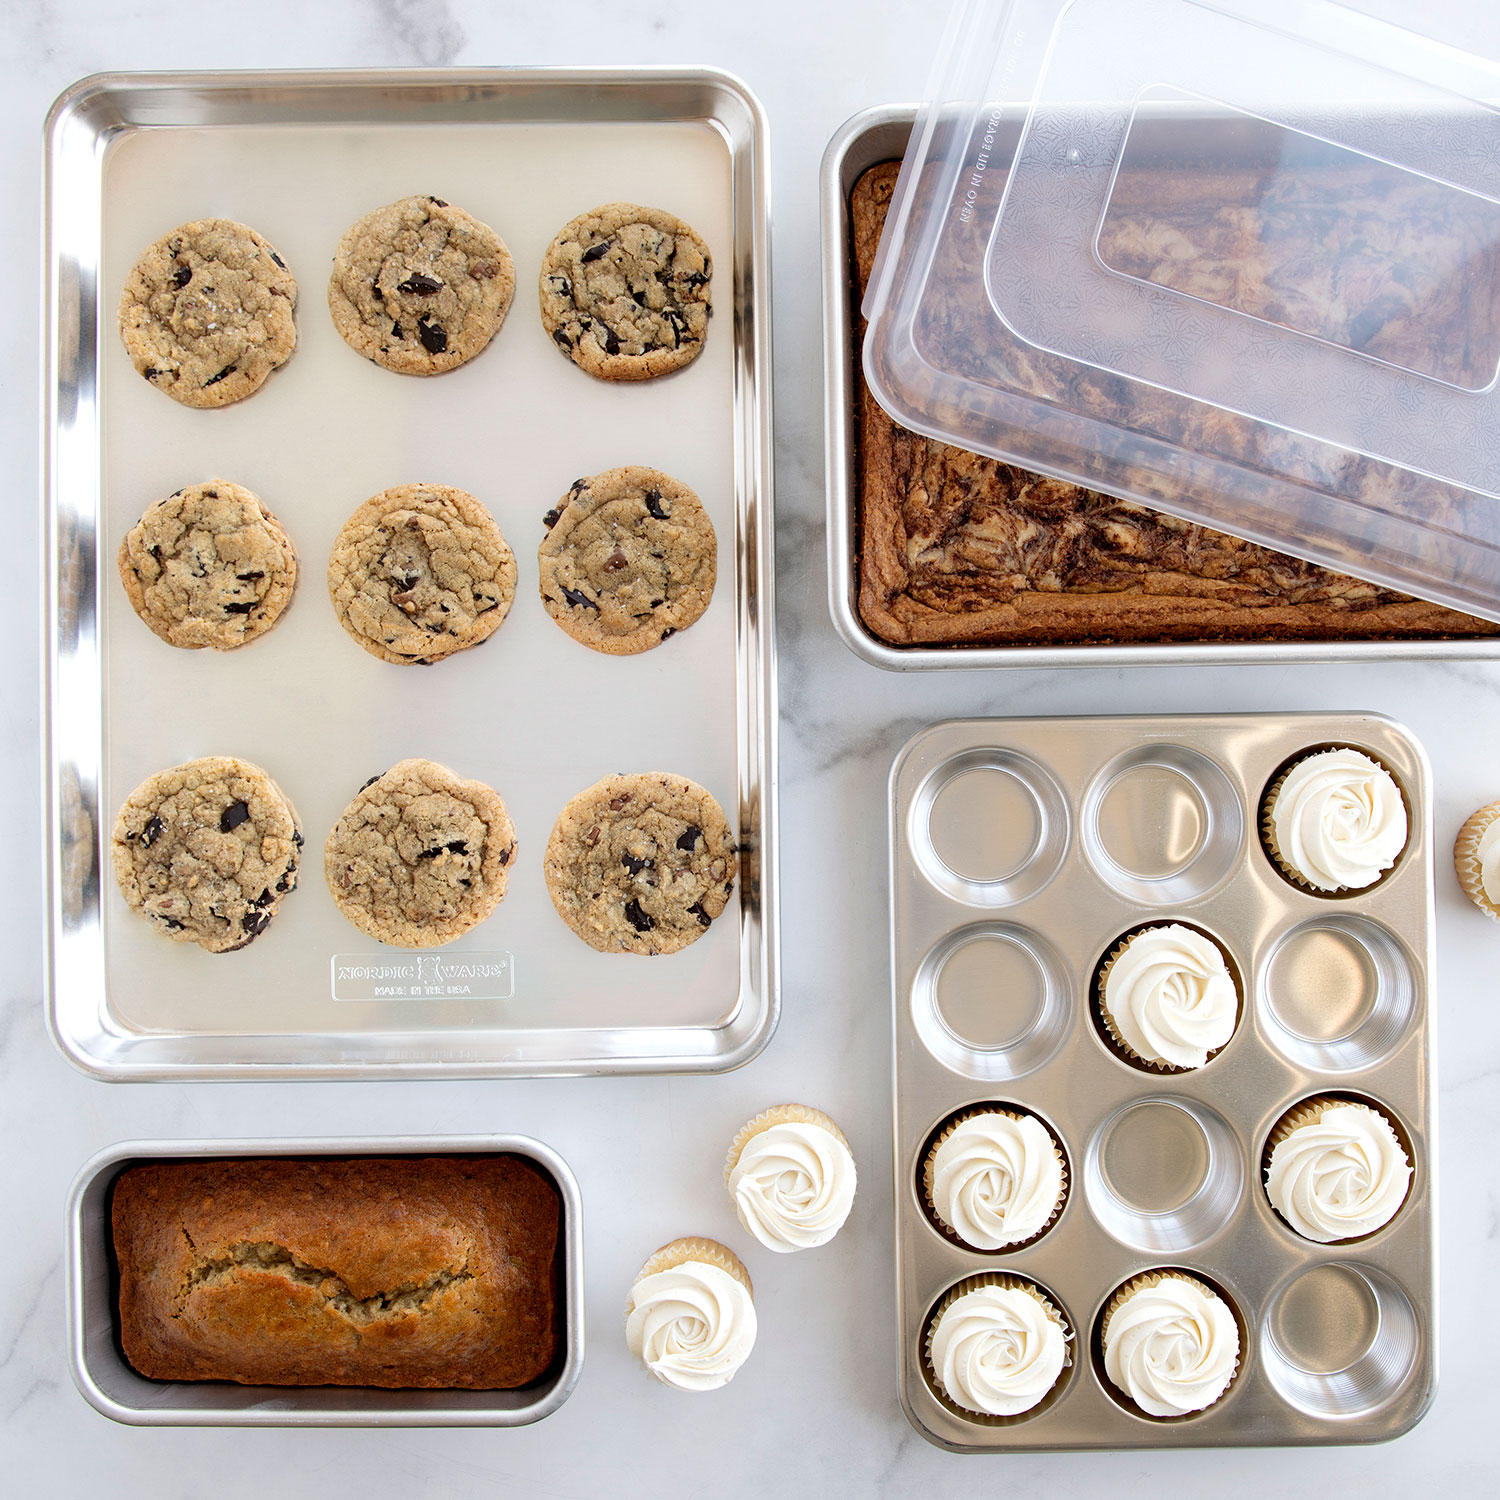 Nordic Ware Silver Naturals Baking Set of 5, Half sheet, Muffin, 1lb and 9x13 Cake Pan With Lid